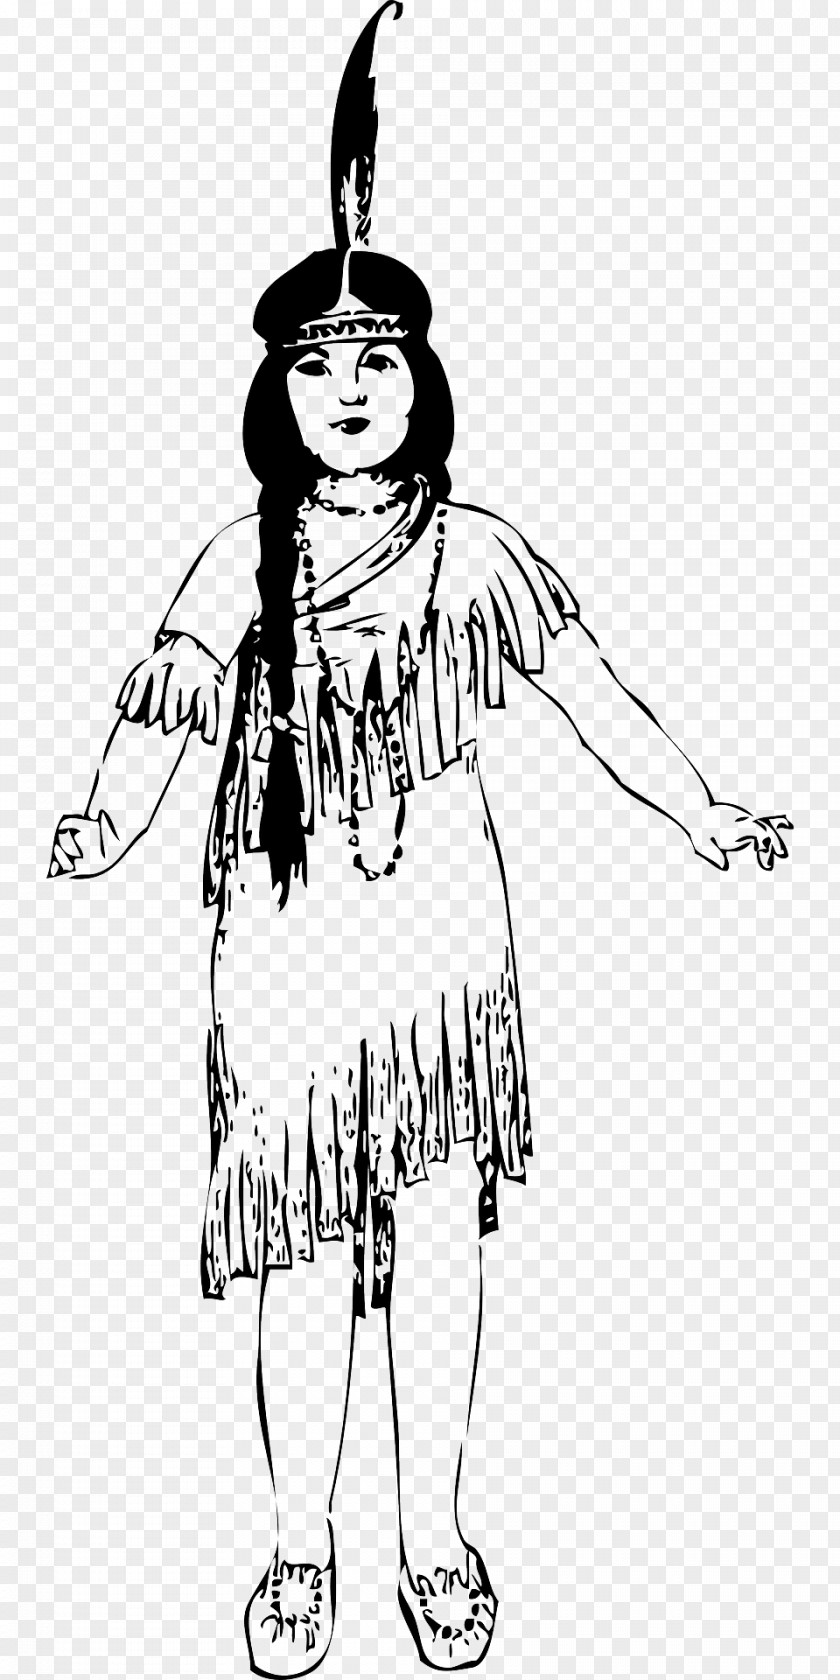 Indians Native Americans In The United States Clip Art PNG